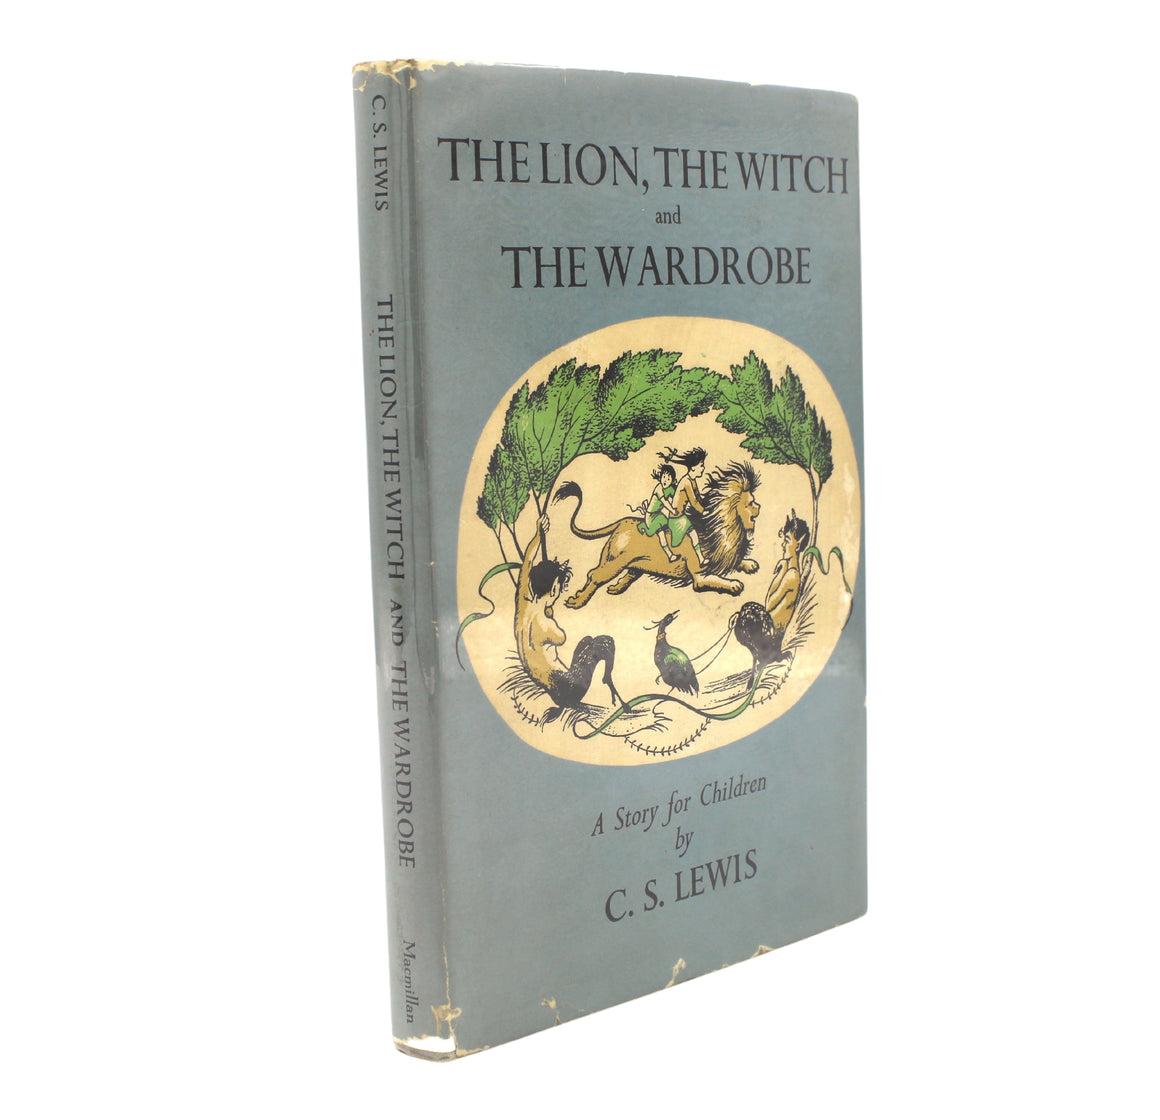 The Lion, The Witch, and The Wardrobe by C. S. Lewis, First US Edition, in Original Dust Jacket, 1950